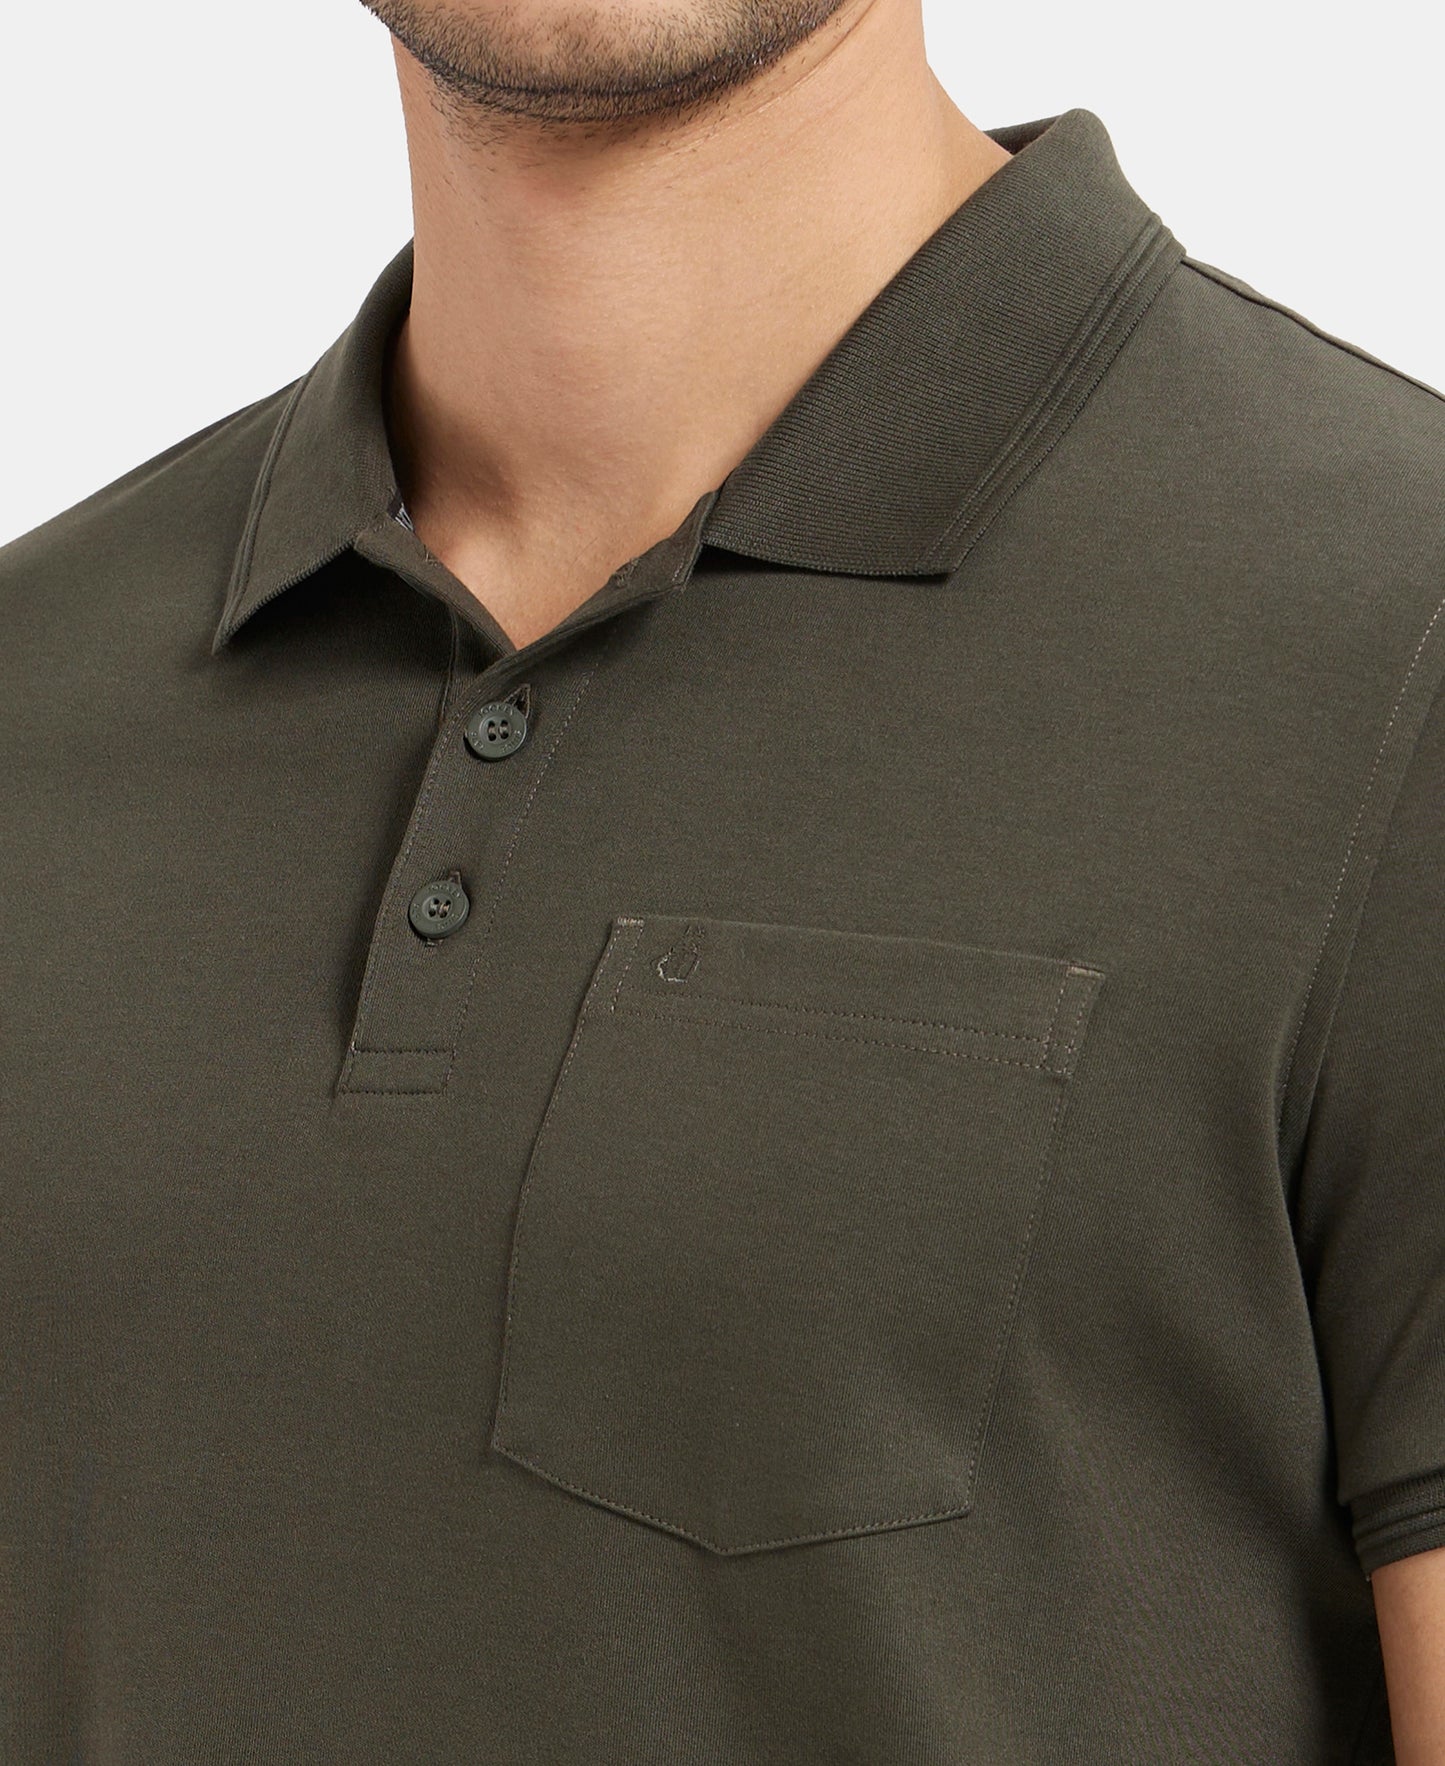 Super Combed Cotton Rich Solid Half Sleeve Polo T-Shirt with Chest Pocket - Olive